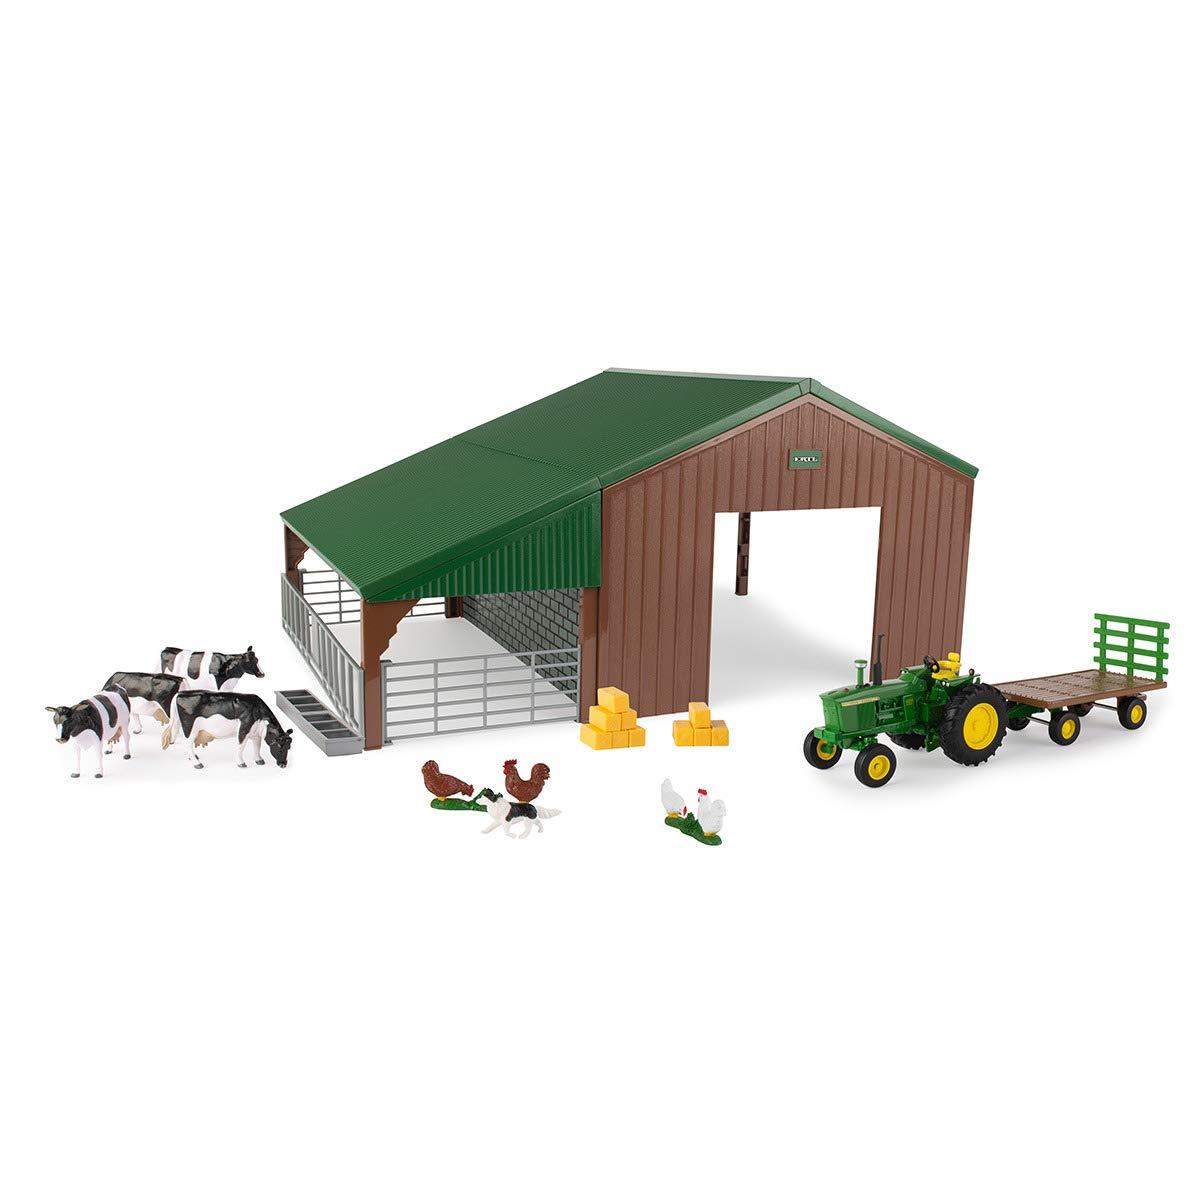 1/32 John Deere Tractor and Shed Playset Toy - LP71780